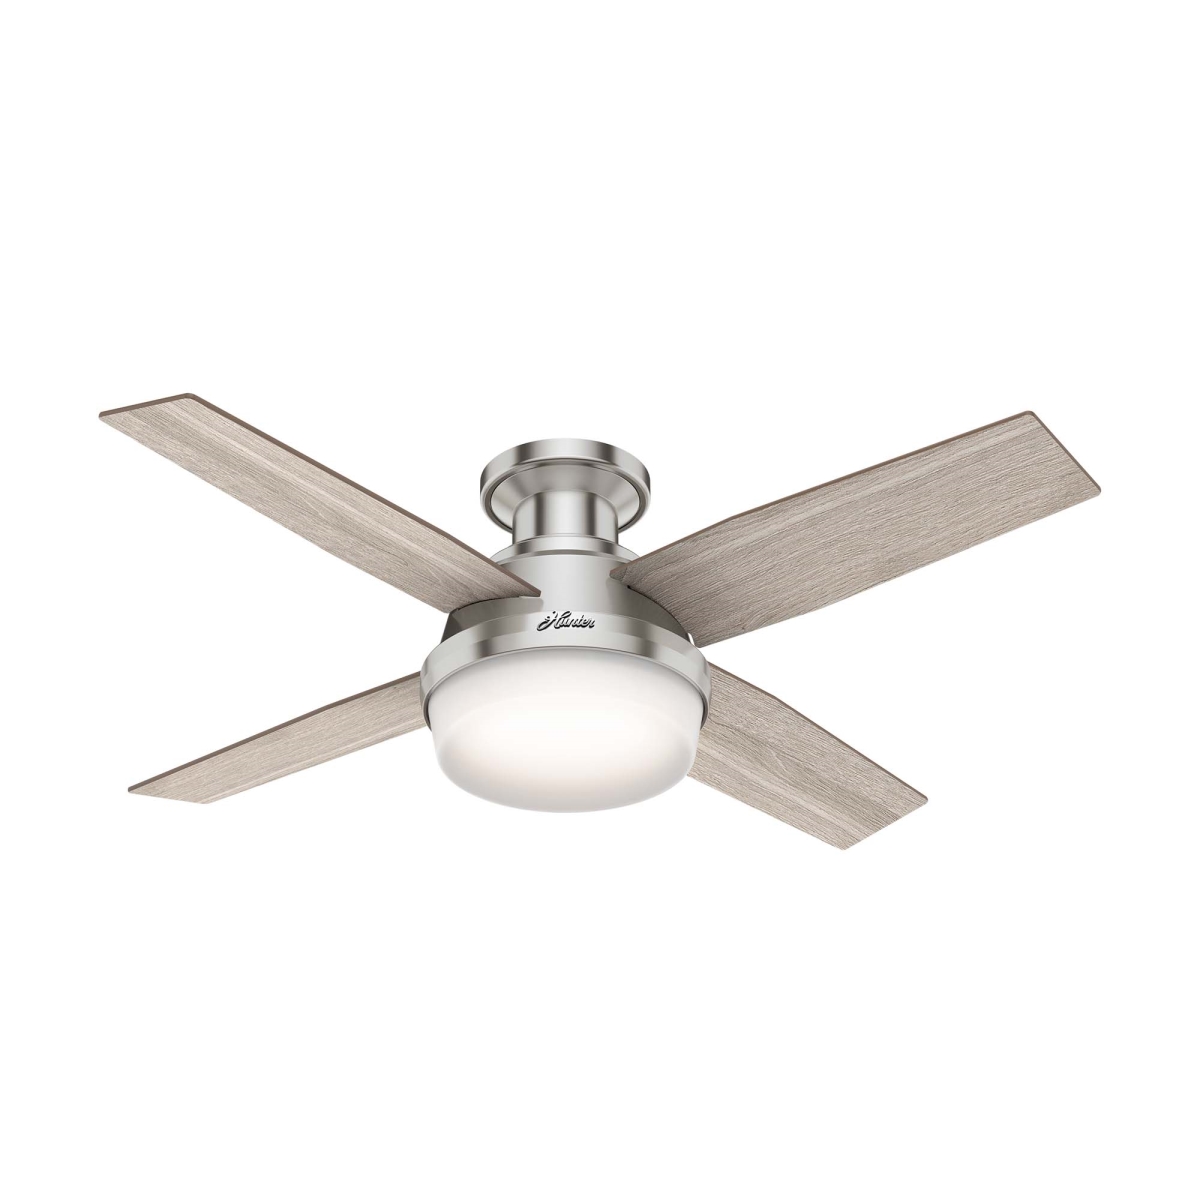 Picture of Hunter 50282 44 in. Dempsey Brushed Nickel Low Profile Ceiling Fan with LED Light Kit & Handheld Remote